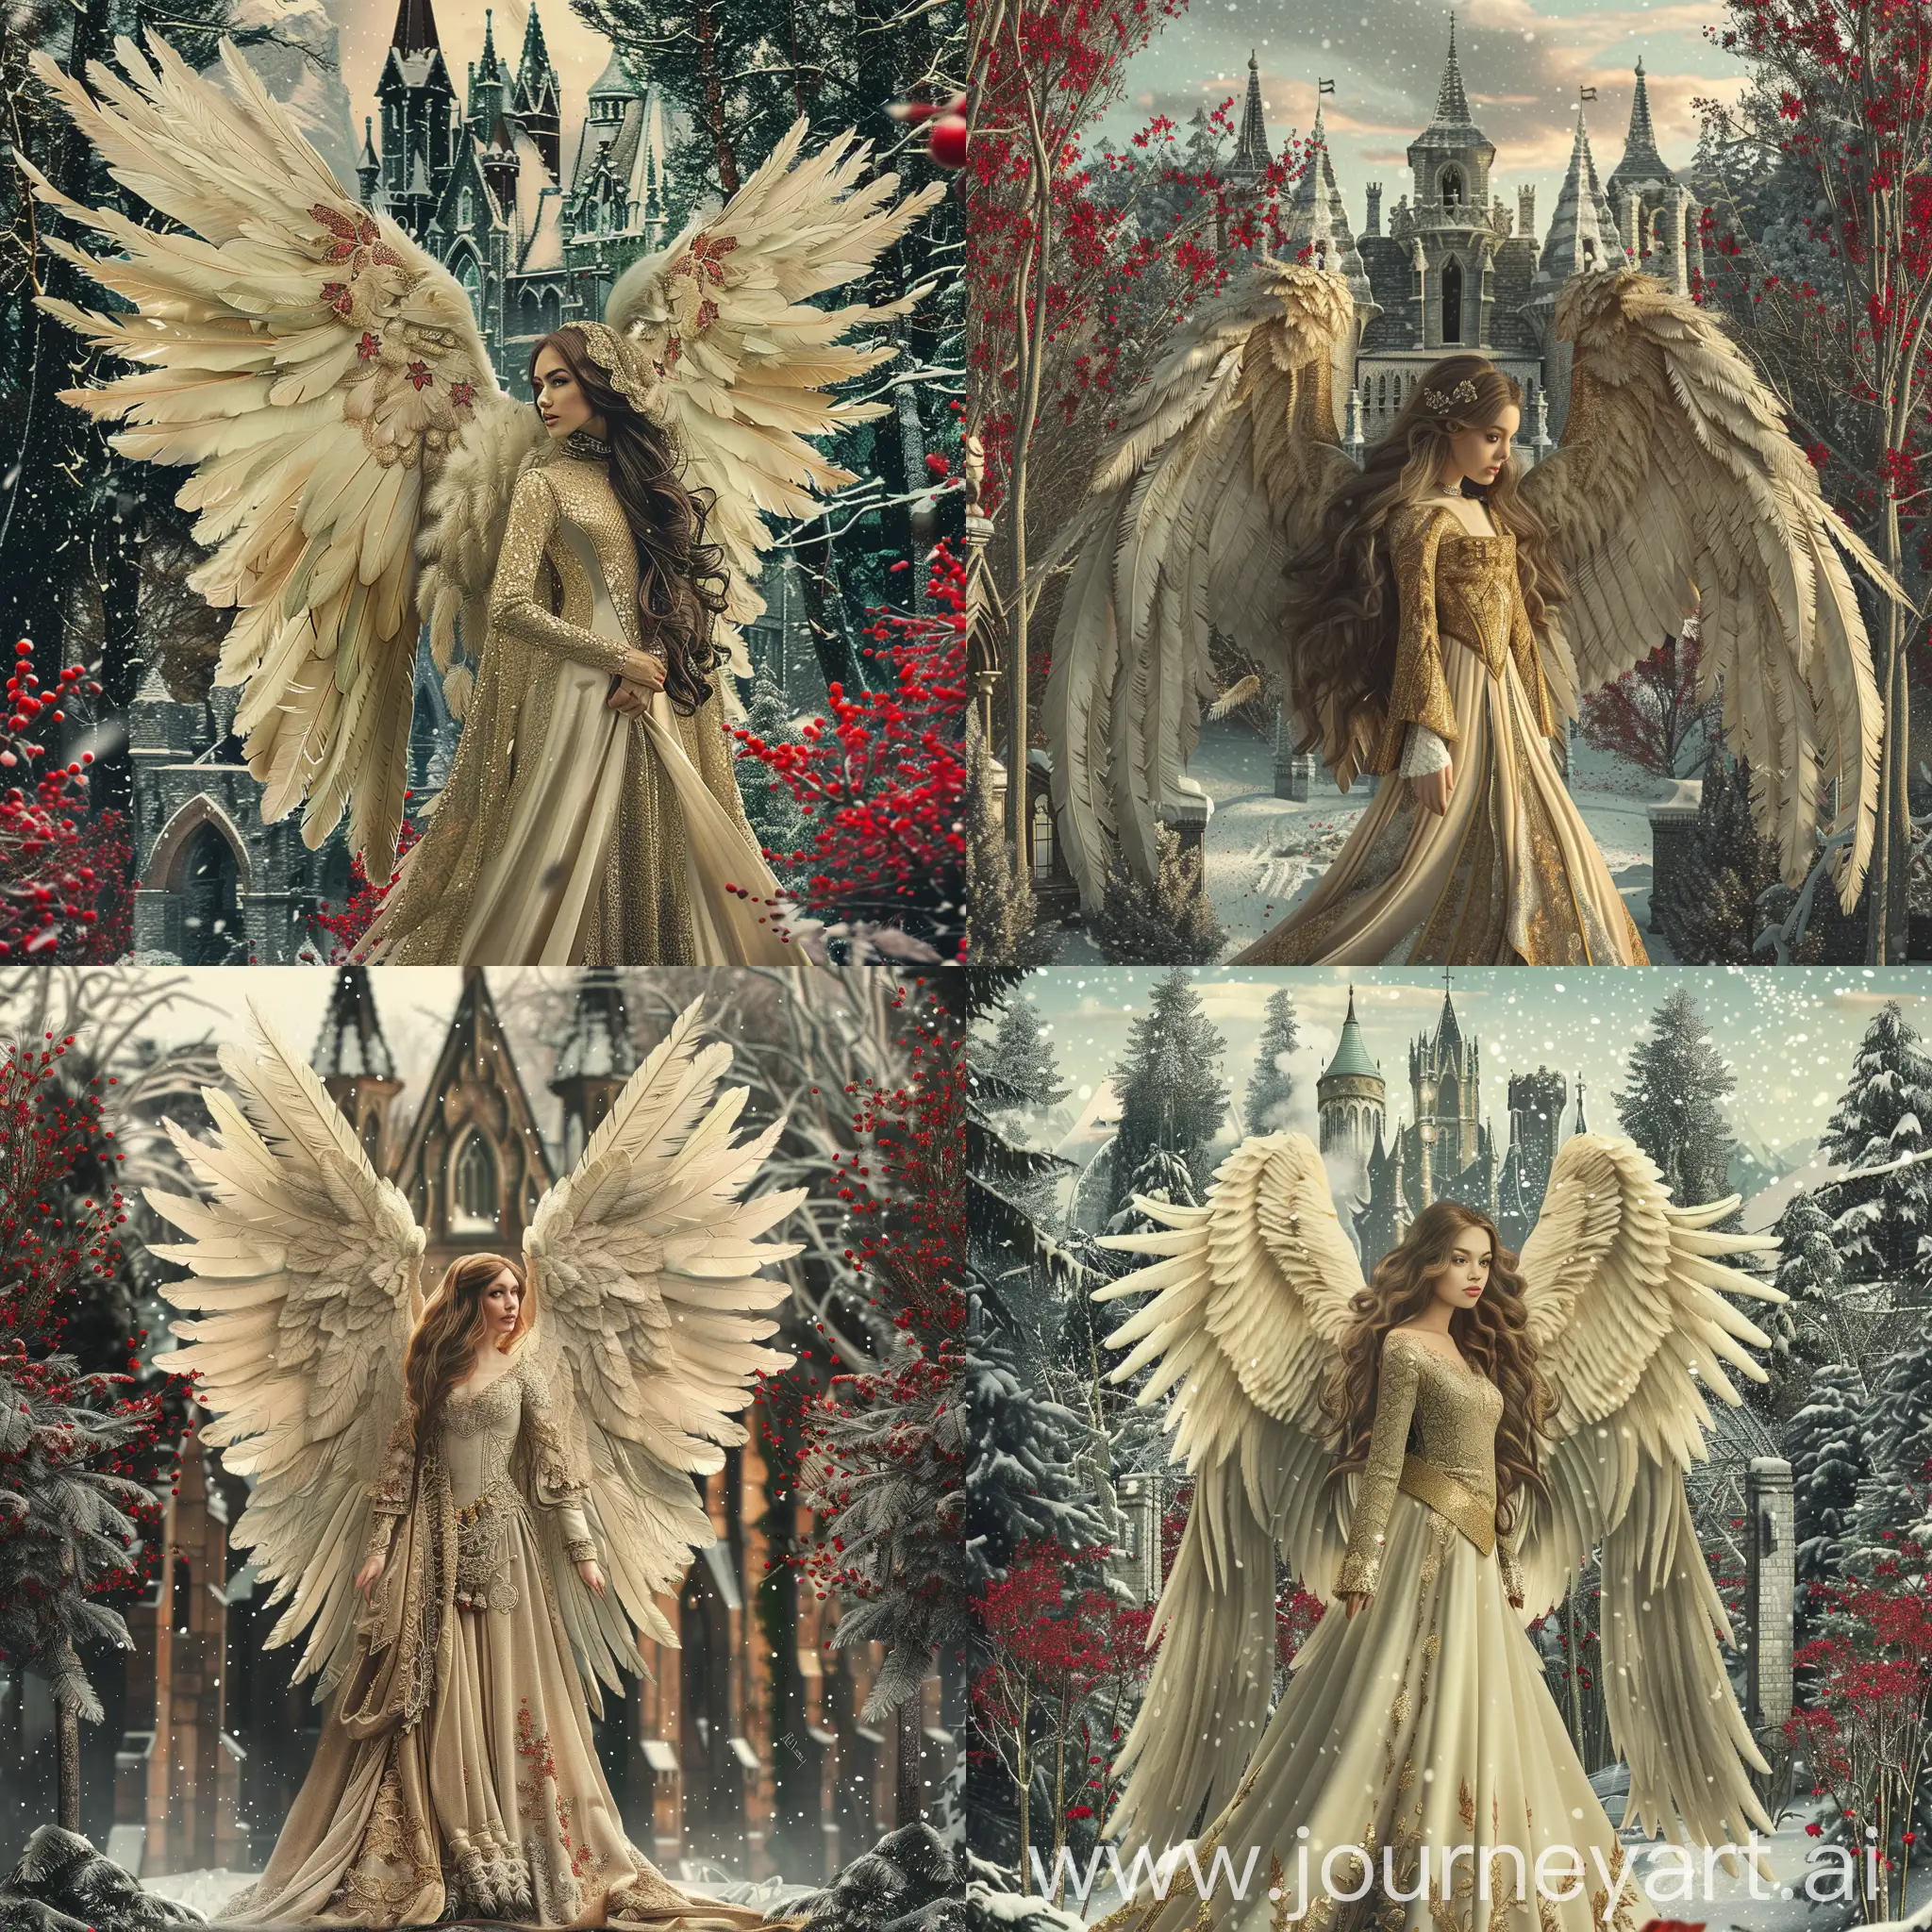 A highly detailed image of a medieval angel with large cream feathered wings and a beautiful face, long hair and a long medieval dress. . She is standing Infront of an enchanted magical castle surrounded by trees with red flowers on them. It is snowing and  there is some snow on the trees. Beautiful magical mysterious fantasy surreal highly detailed